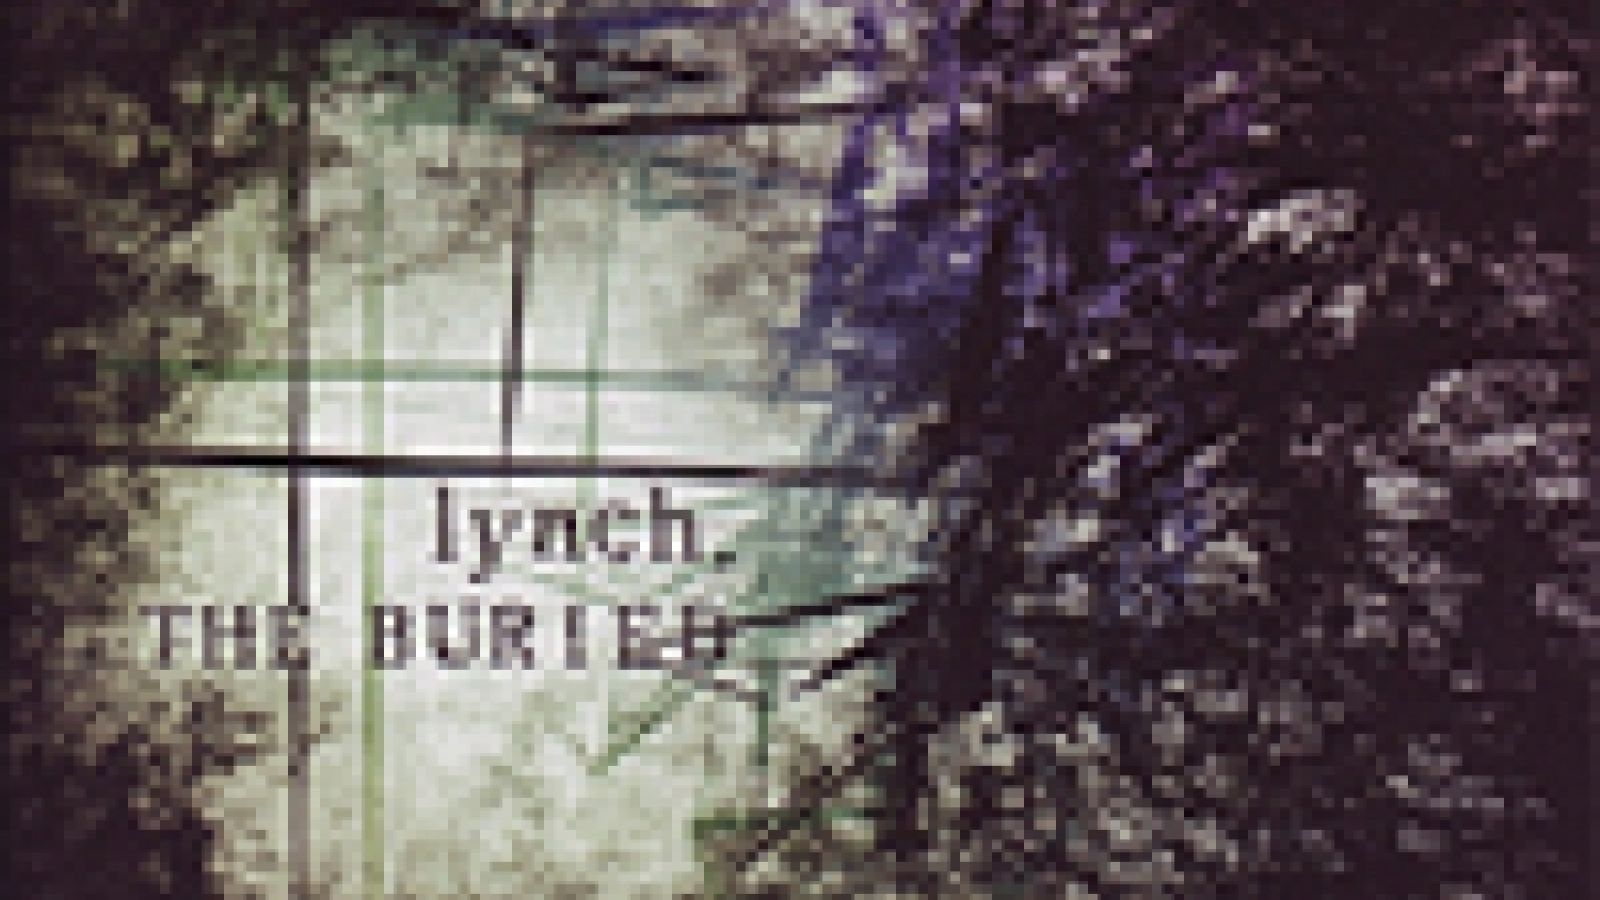 lynch. - THE BURIED © marginal works